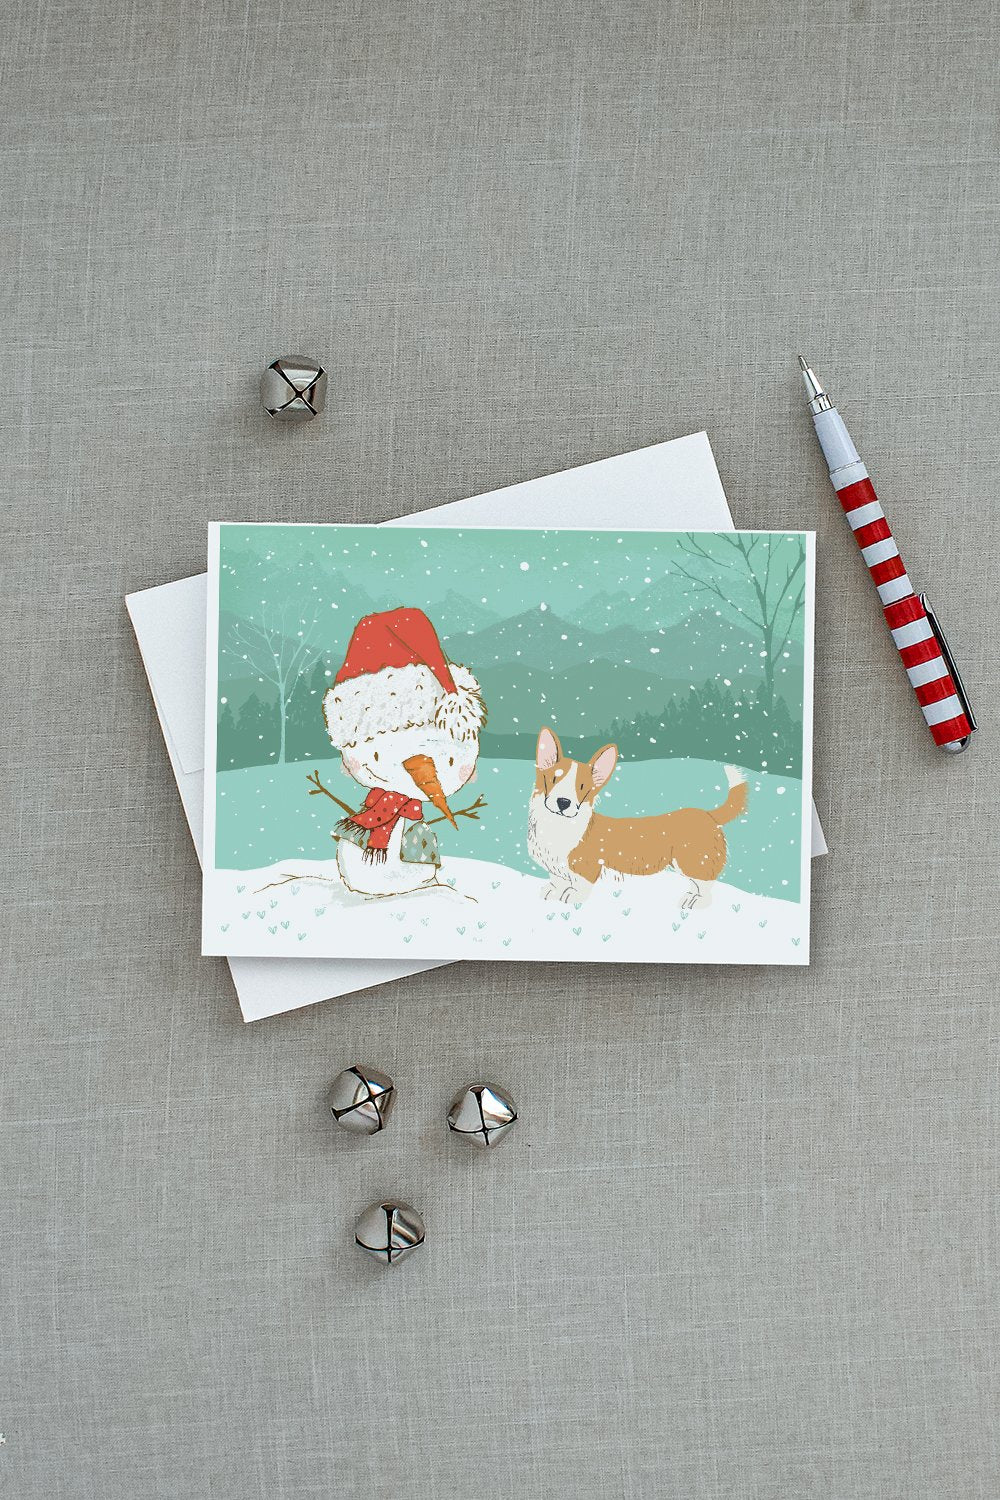 Cardigan Corgi Snowman Christmas Greeting Cards and Envelopes Pack of 8 - the-store.com